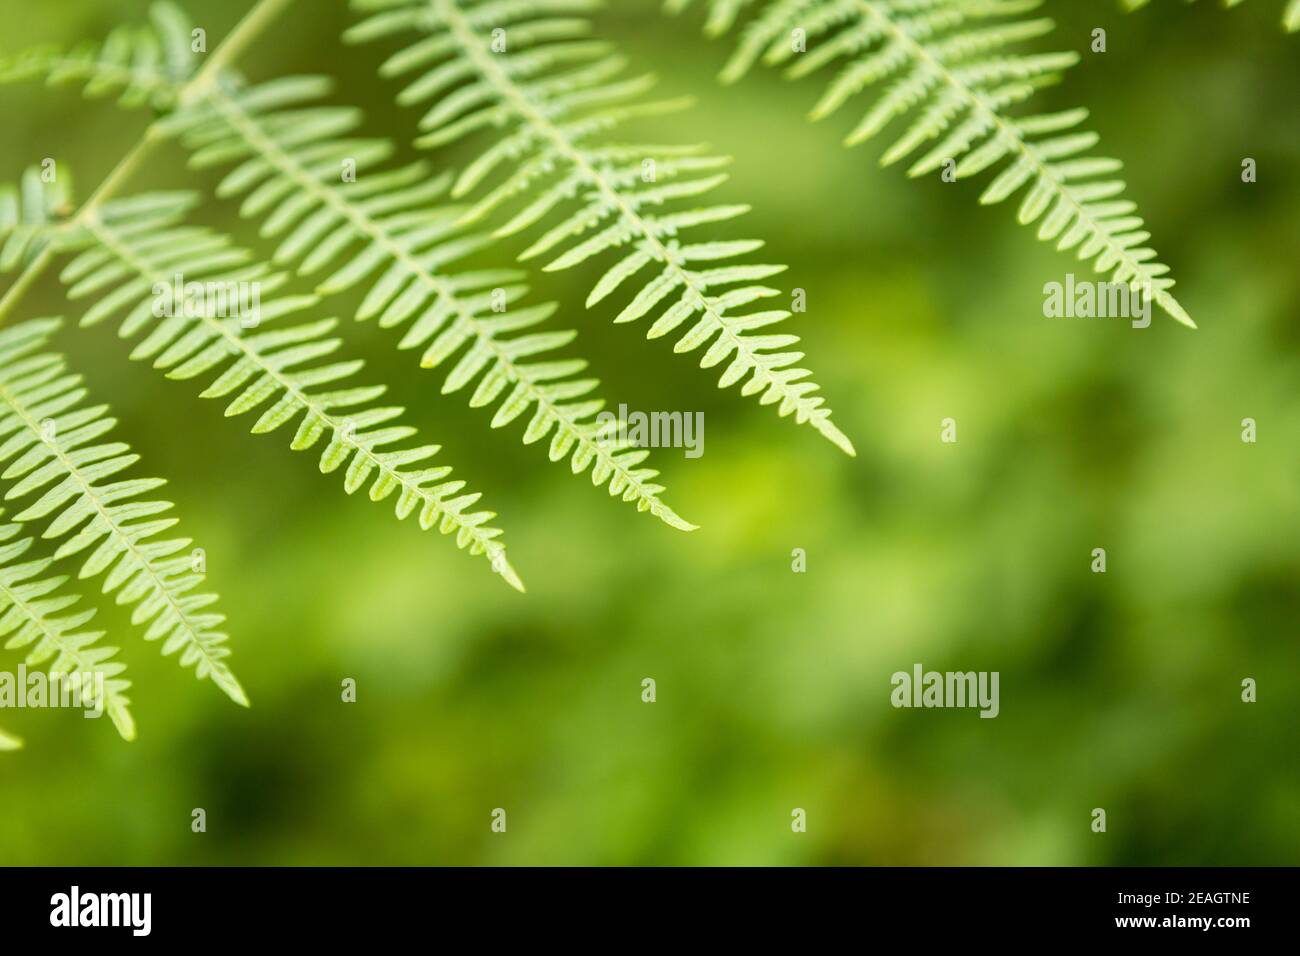 Fern leaf close up with blurred green background - wellbeing, nature, sustainability concept Stock Photo